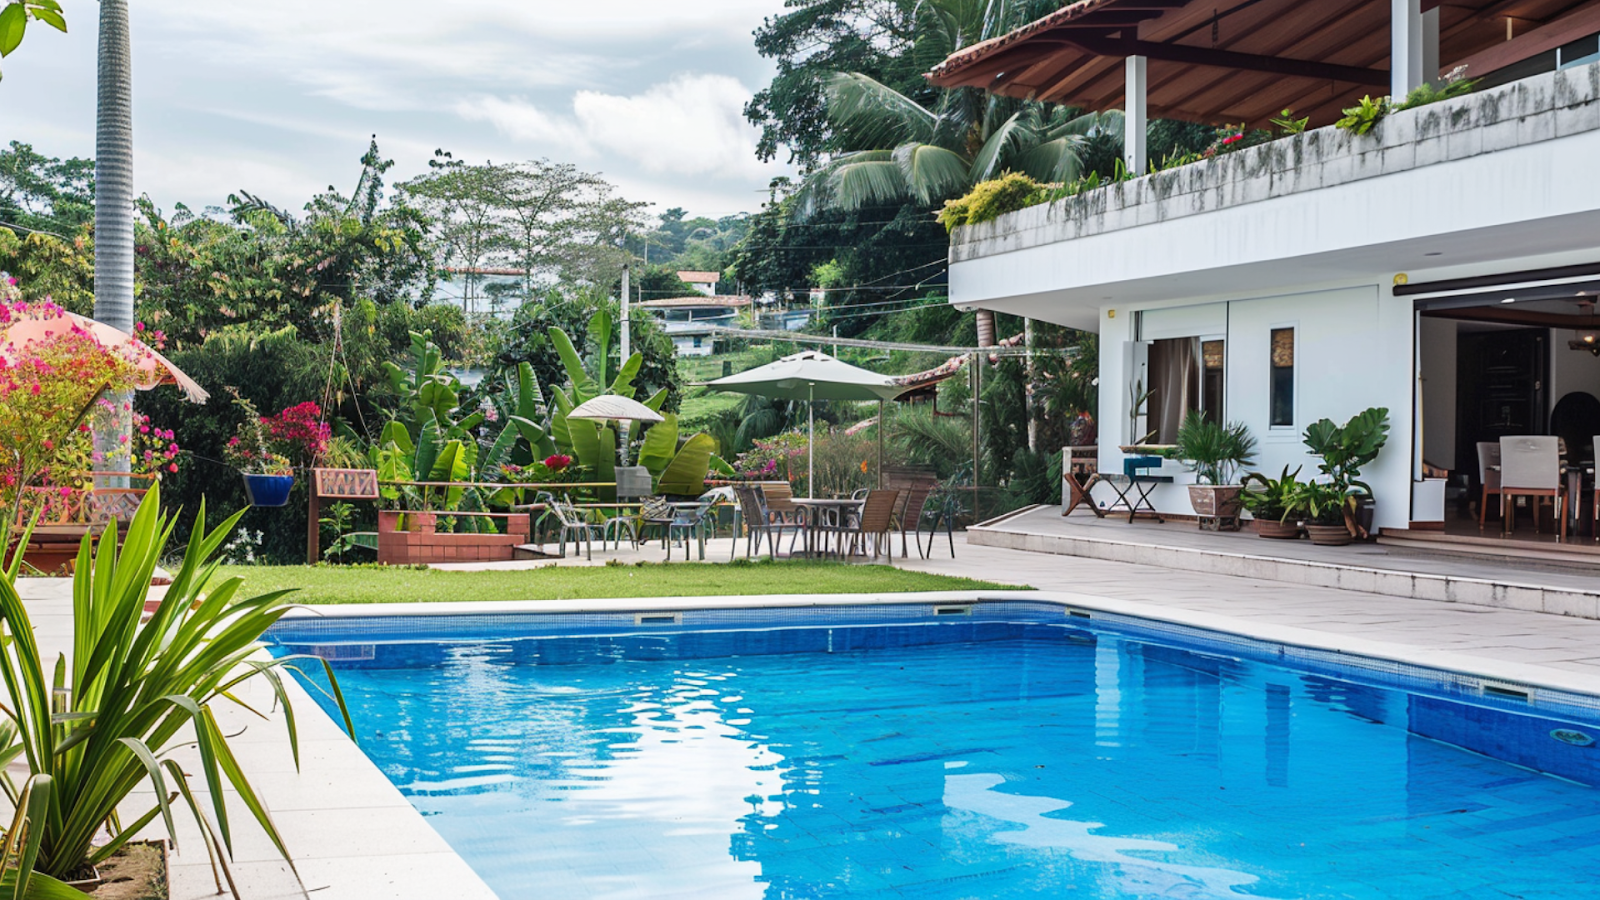 A two-story luxury vacation rental with a pool in Sao Paulo surrounded by plants